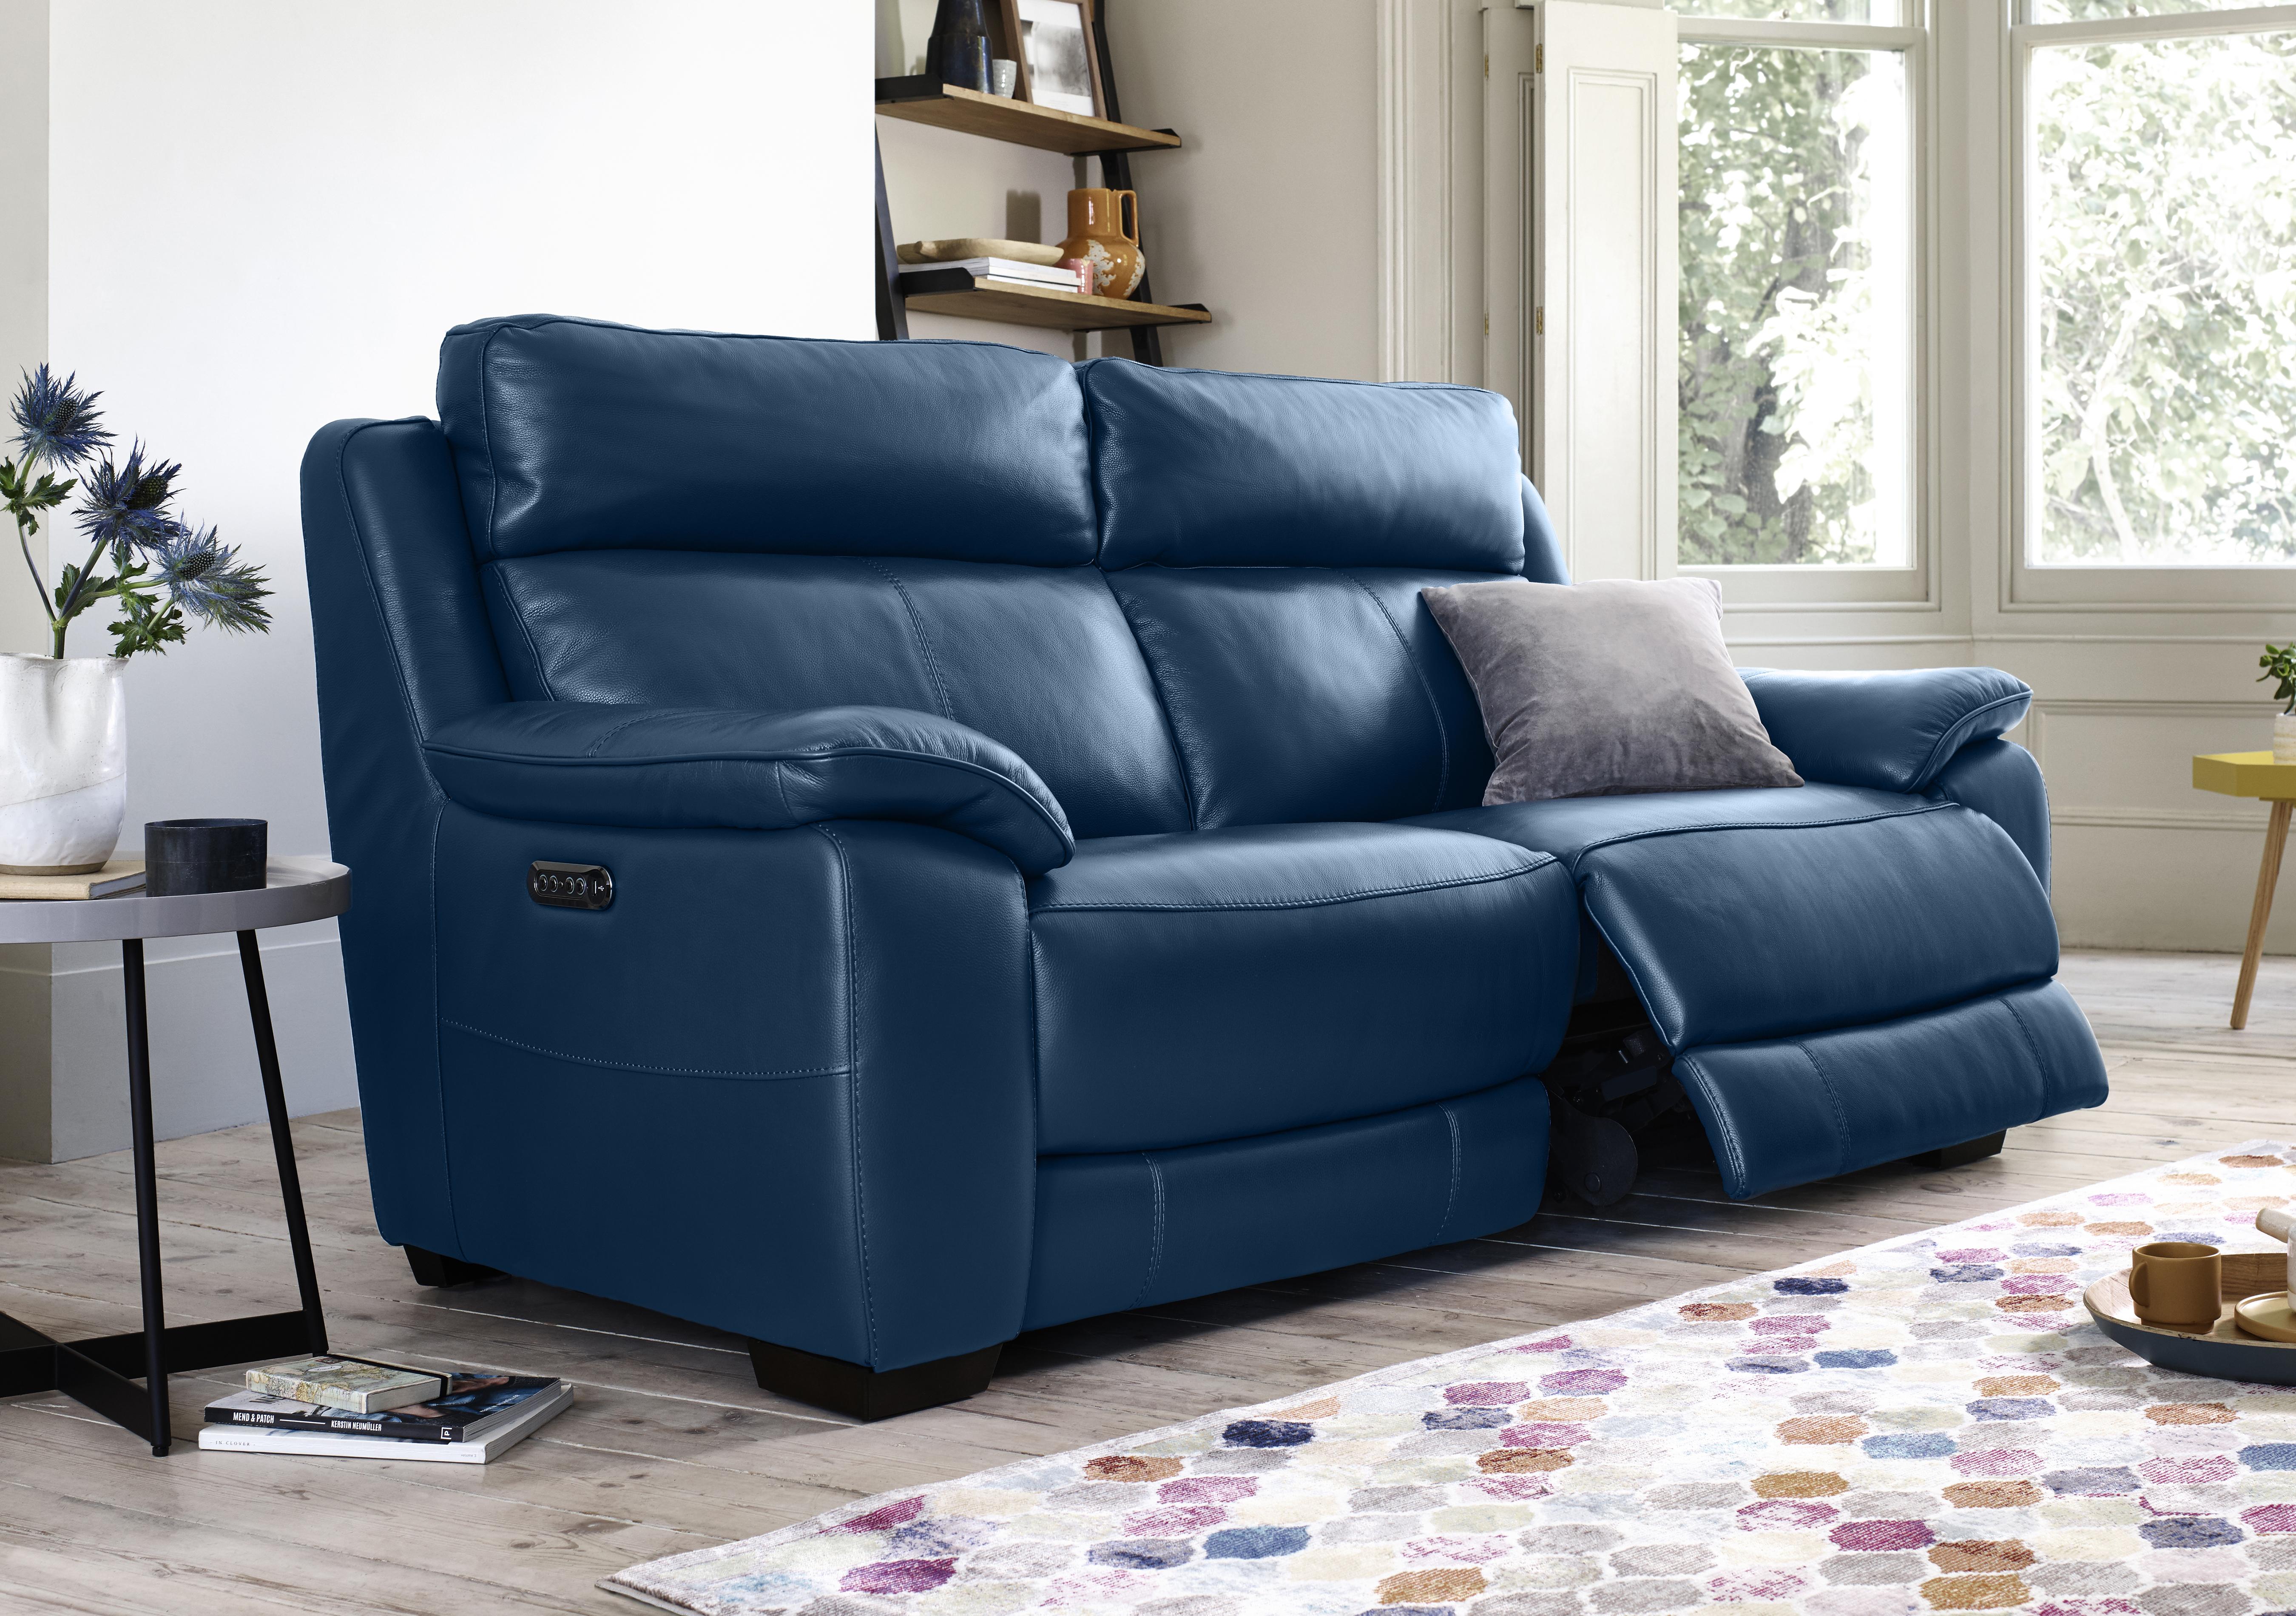 Starlight Express 3 Seater Leather Sofa in  on Furniture Village